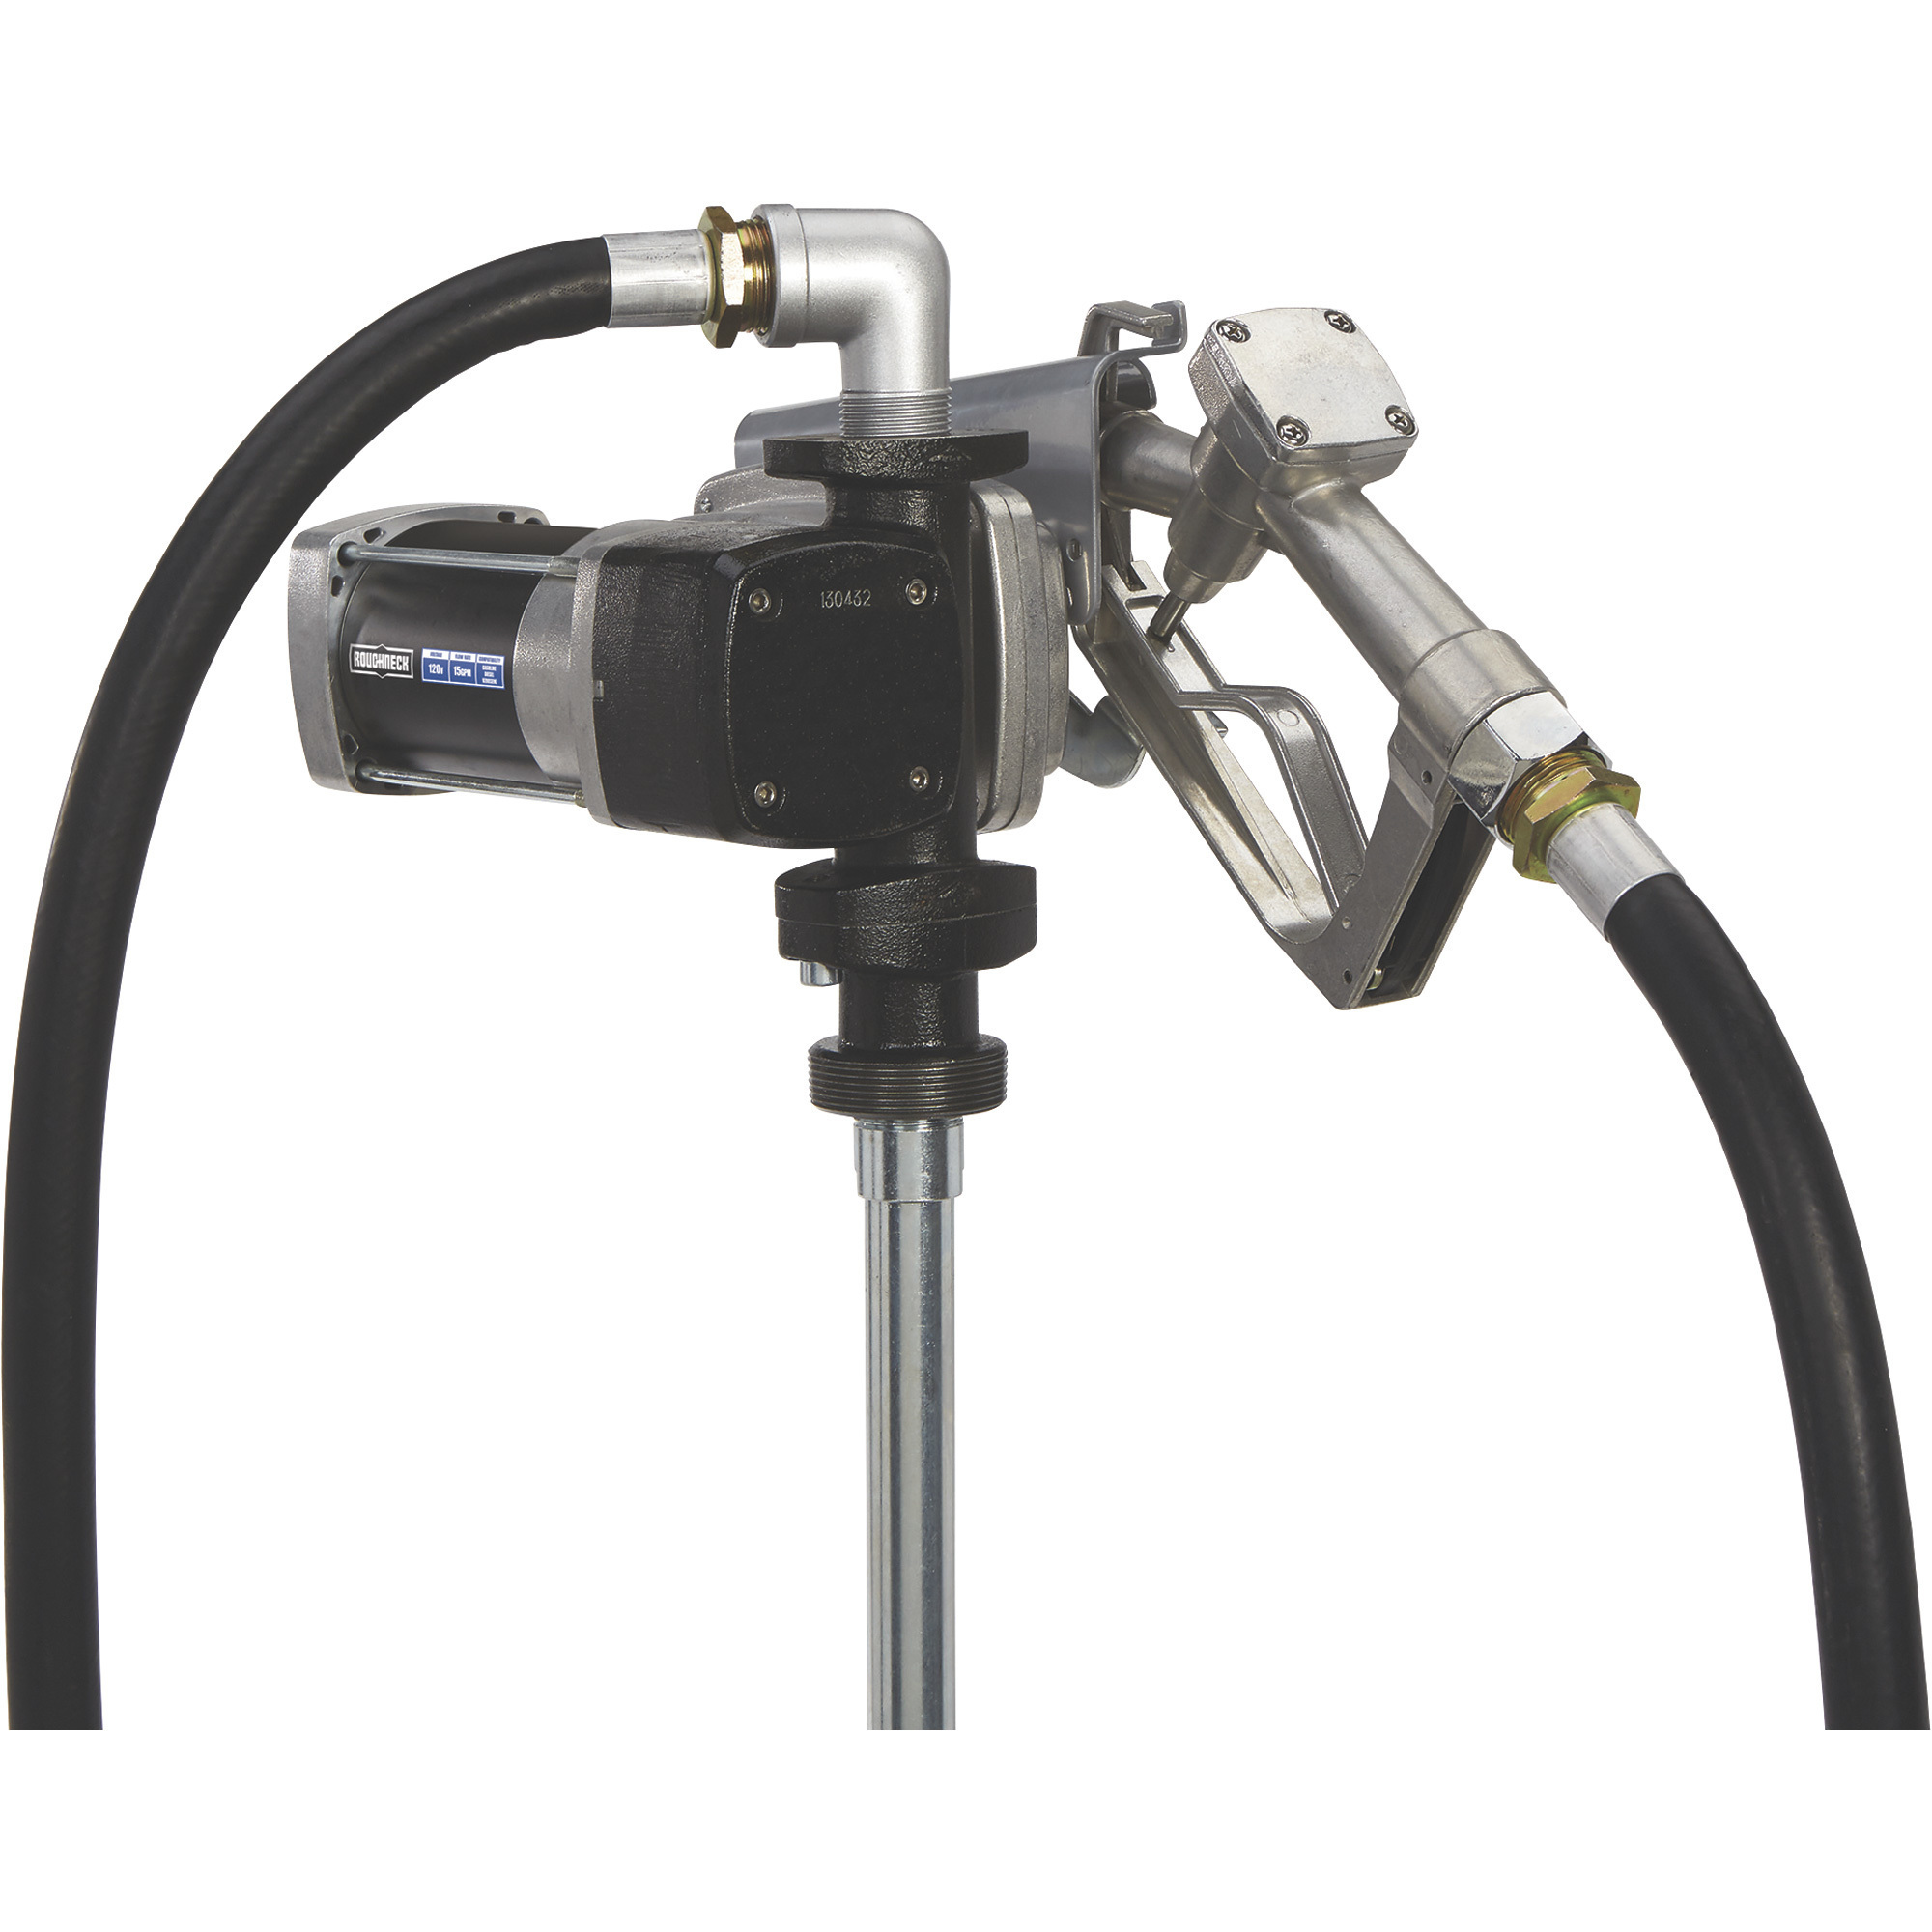 Water-proof Efficient And Requisite diesel fuel pump 12v 